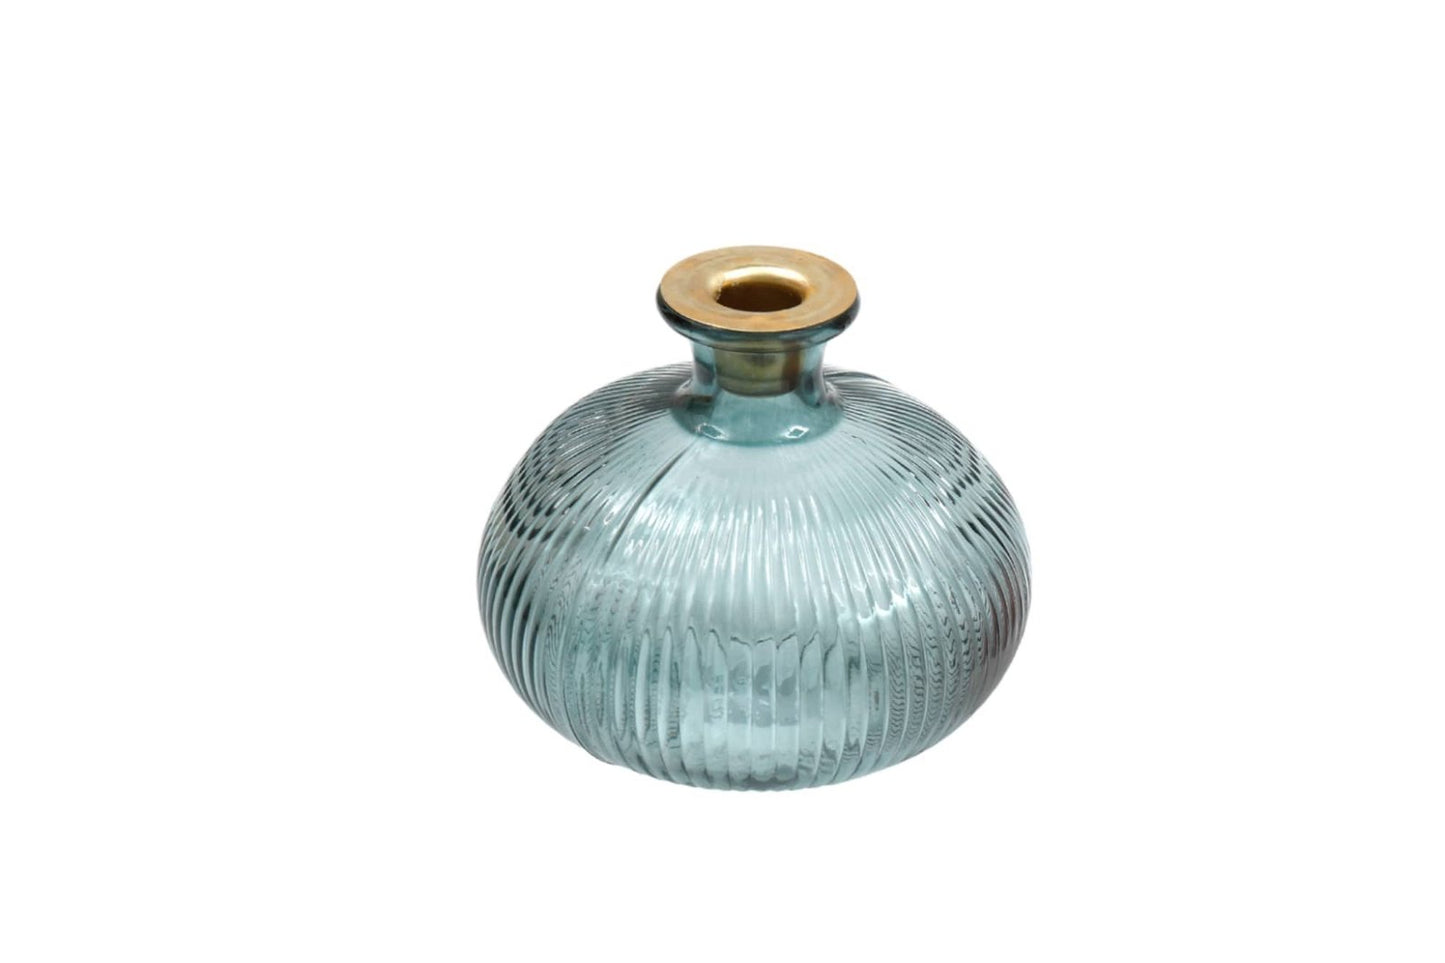 Blue Ribbed Glass Candle Holder - a Cheeky Plant